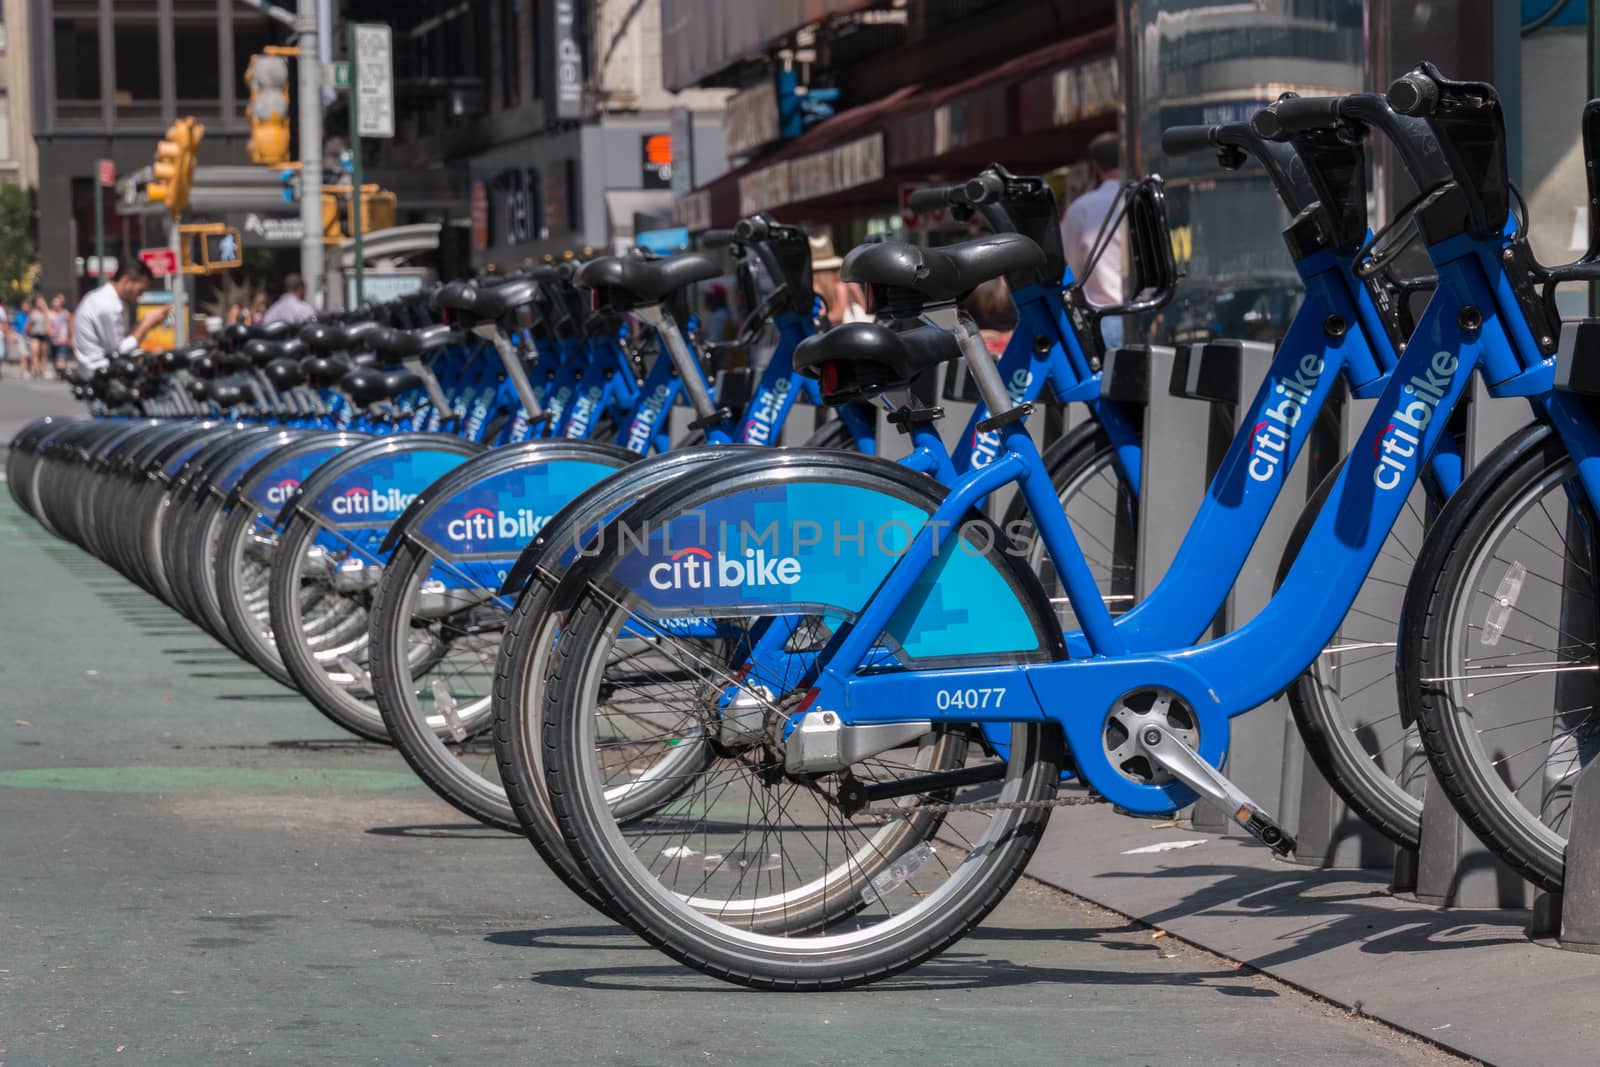 City bikes for hire by derejeb